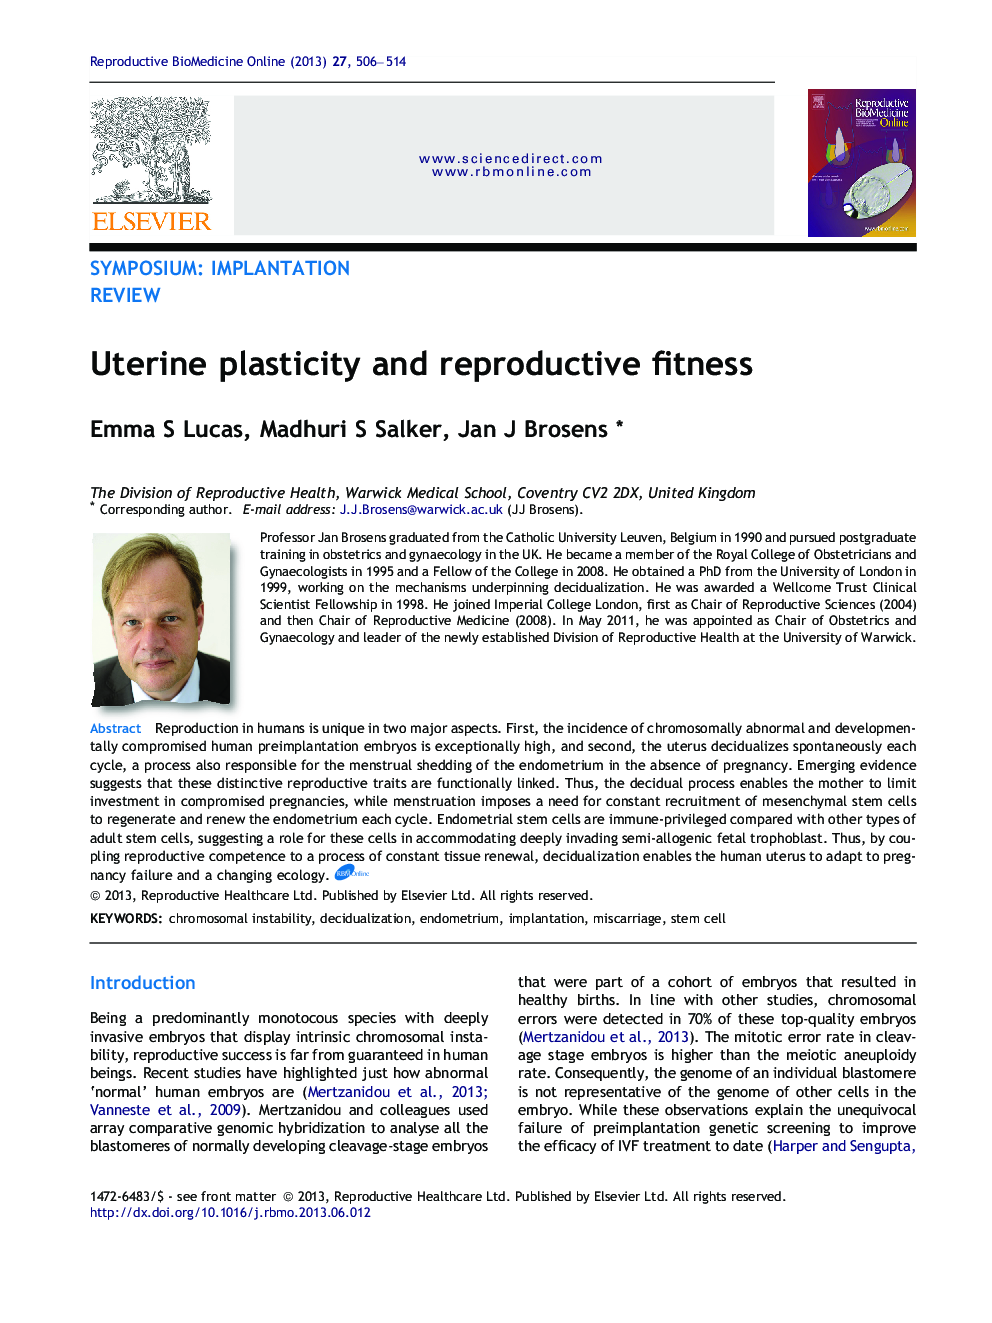 Uterine plasticity and reproductive fitness 